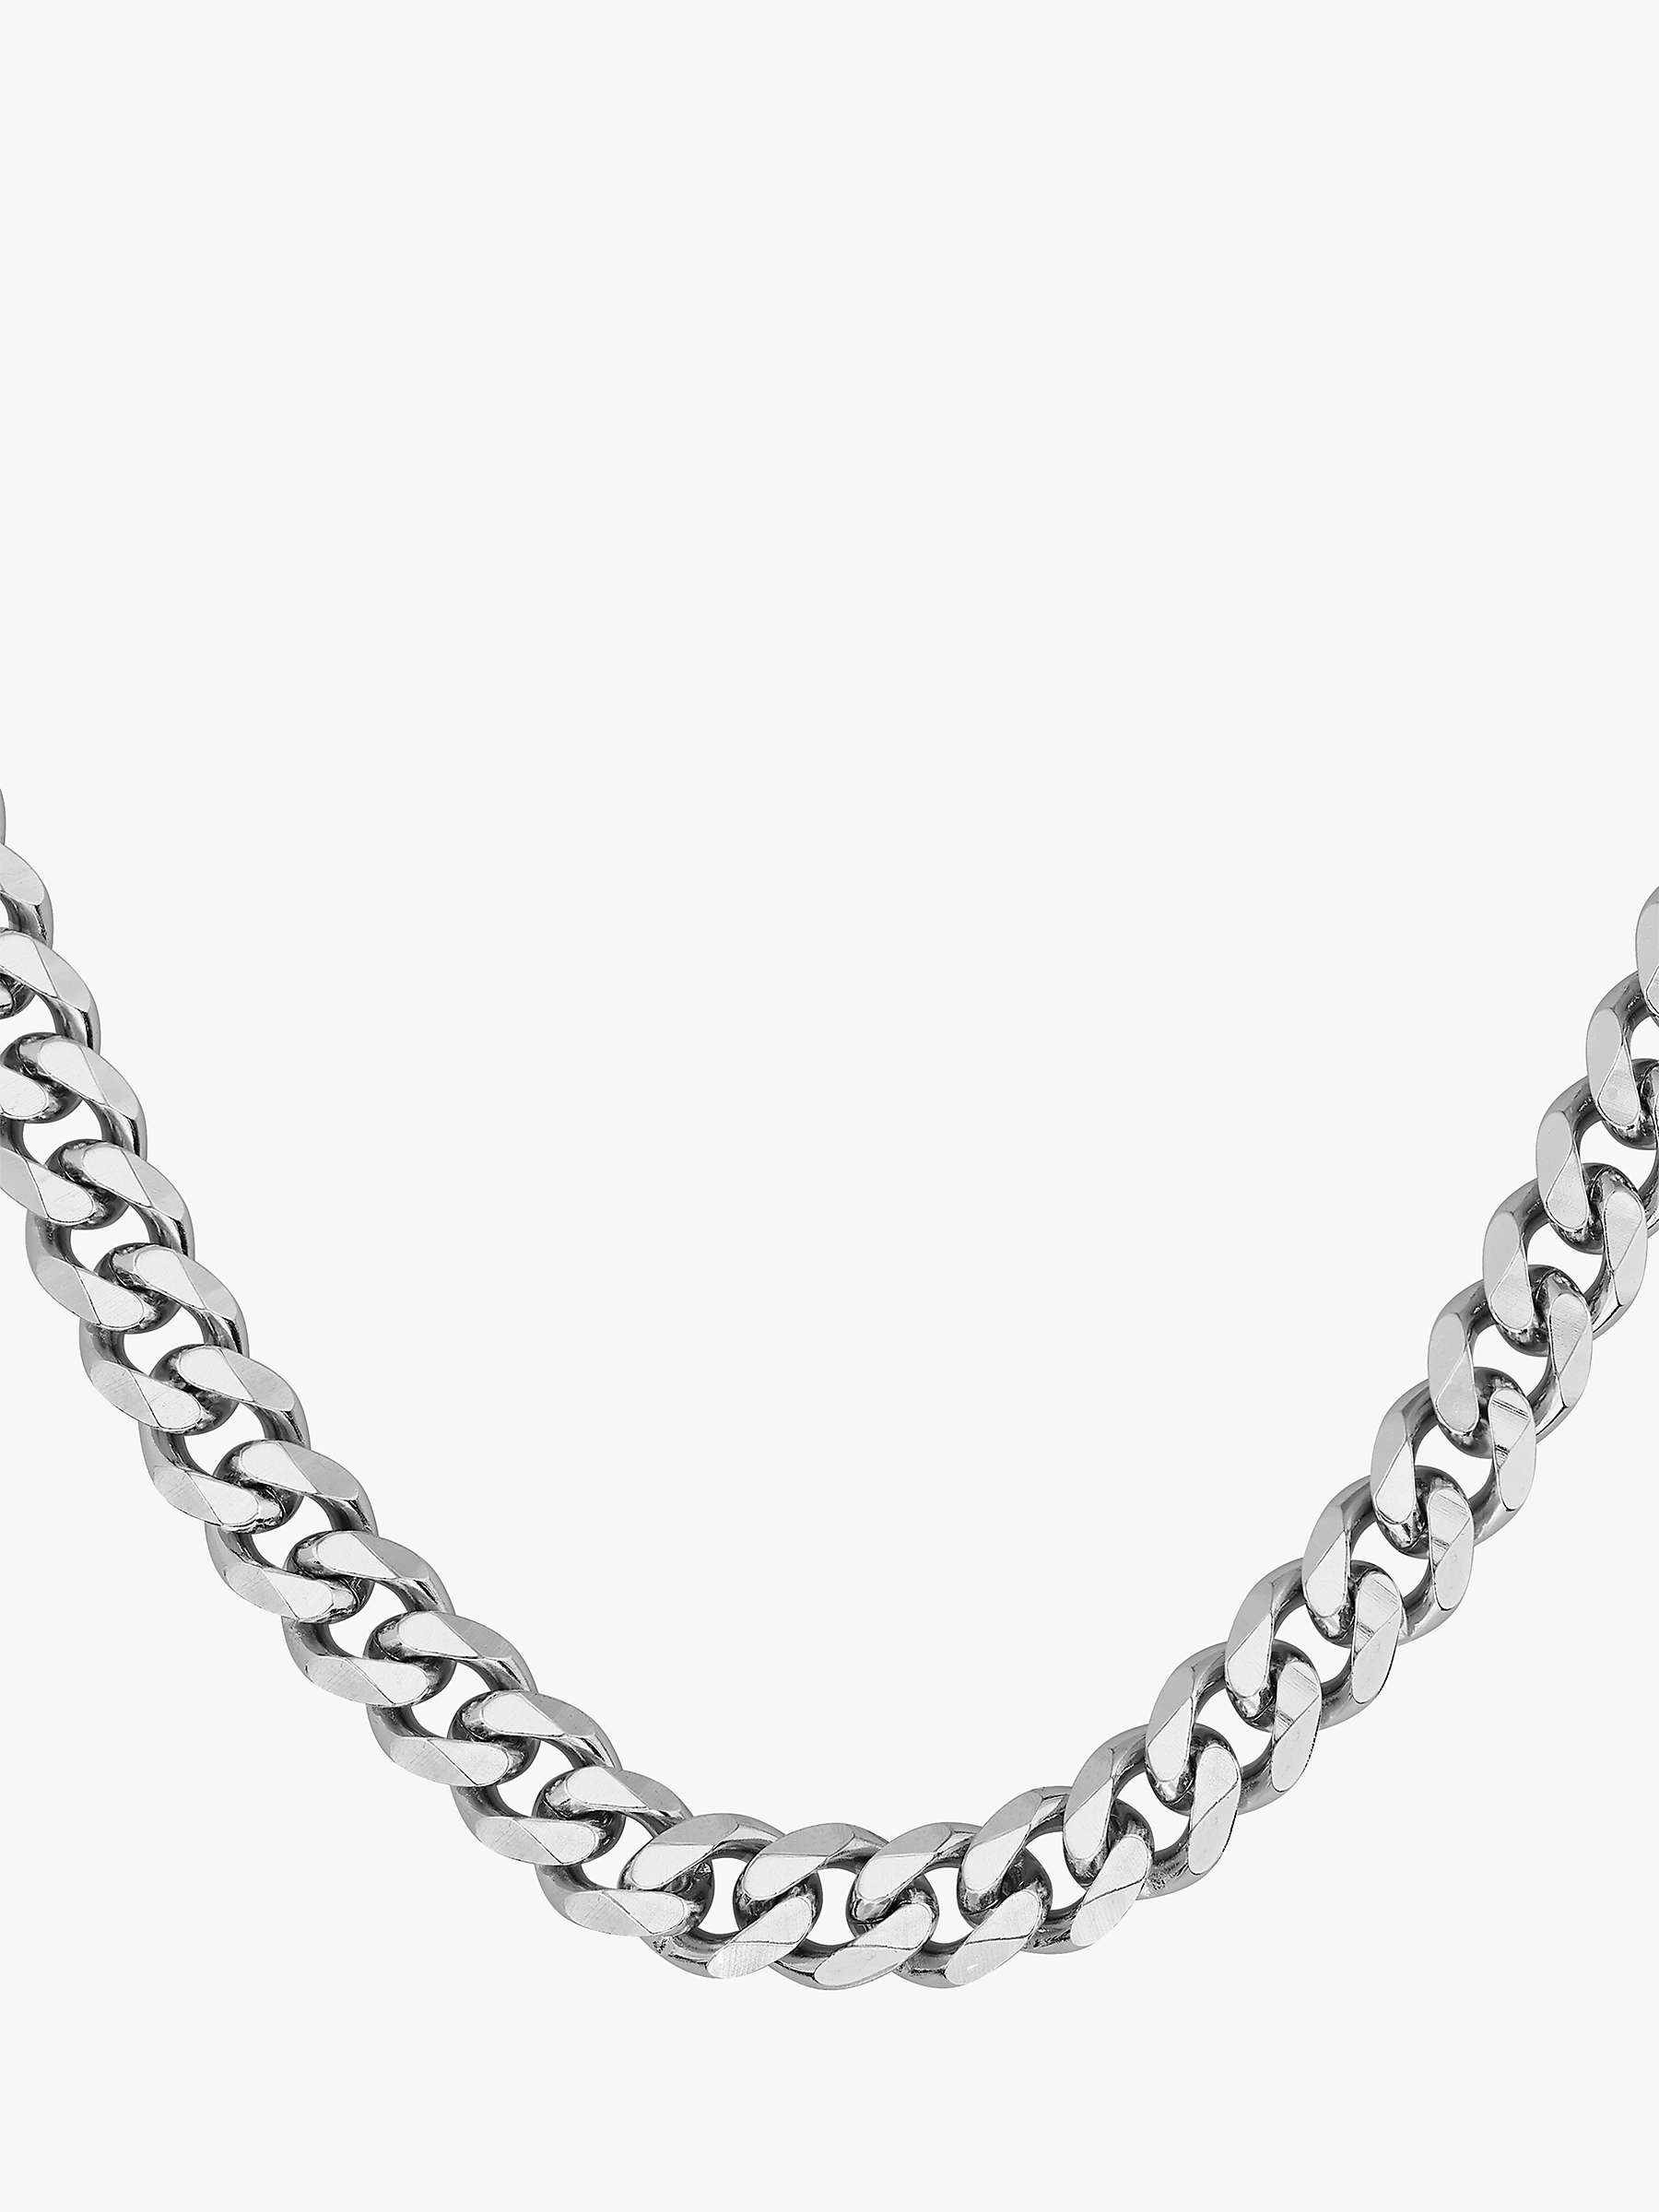 Buy BOSS Men's Curb Chain Necklace, Silver Online at johnlewis.com